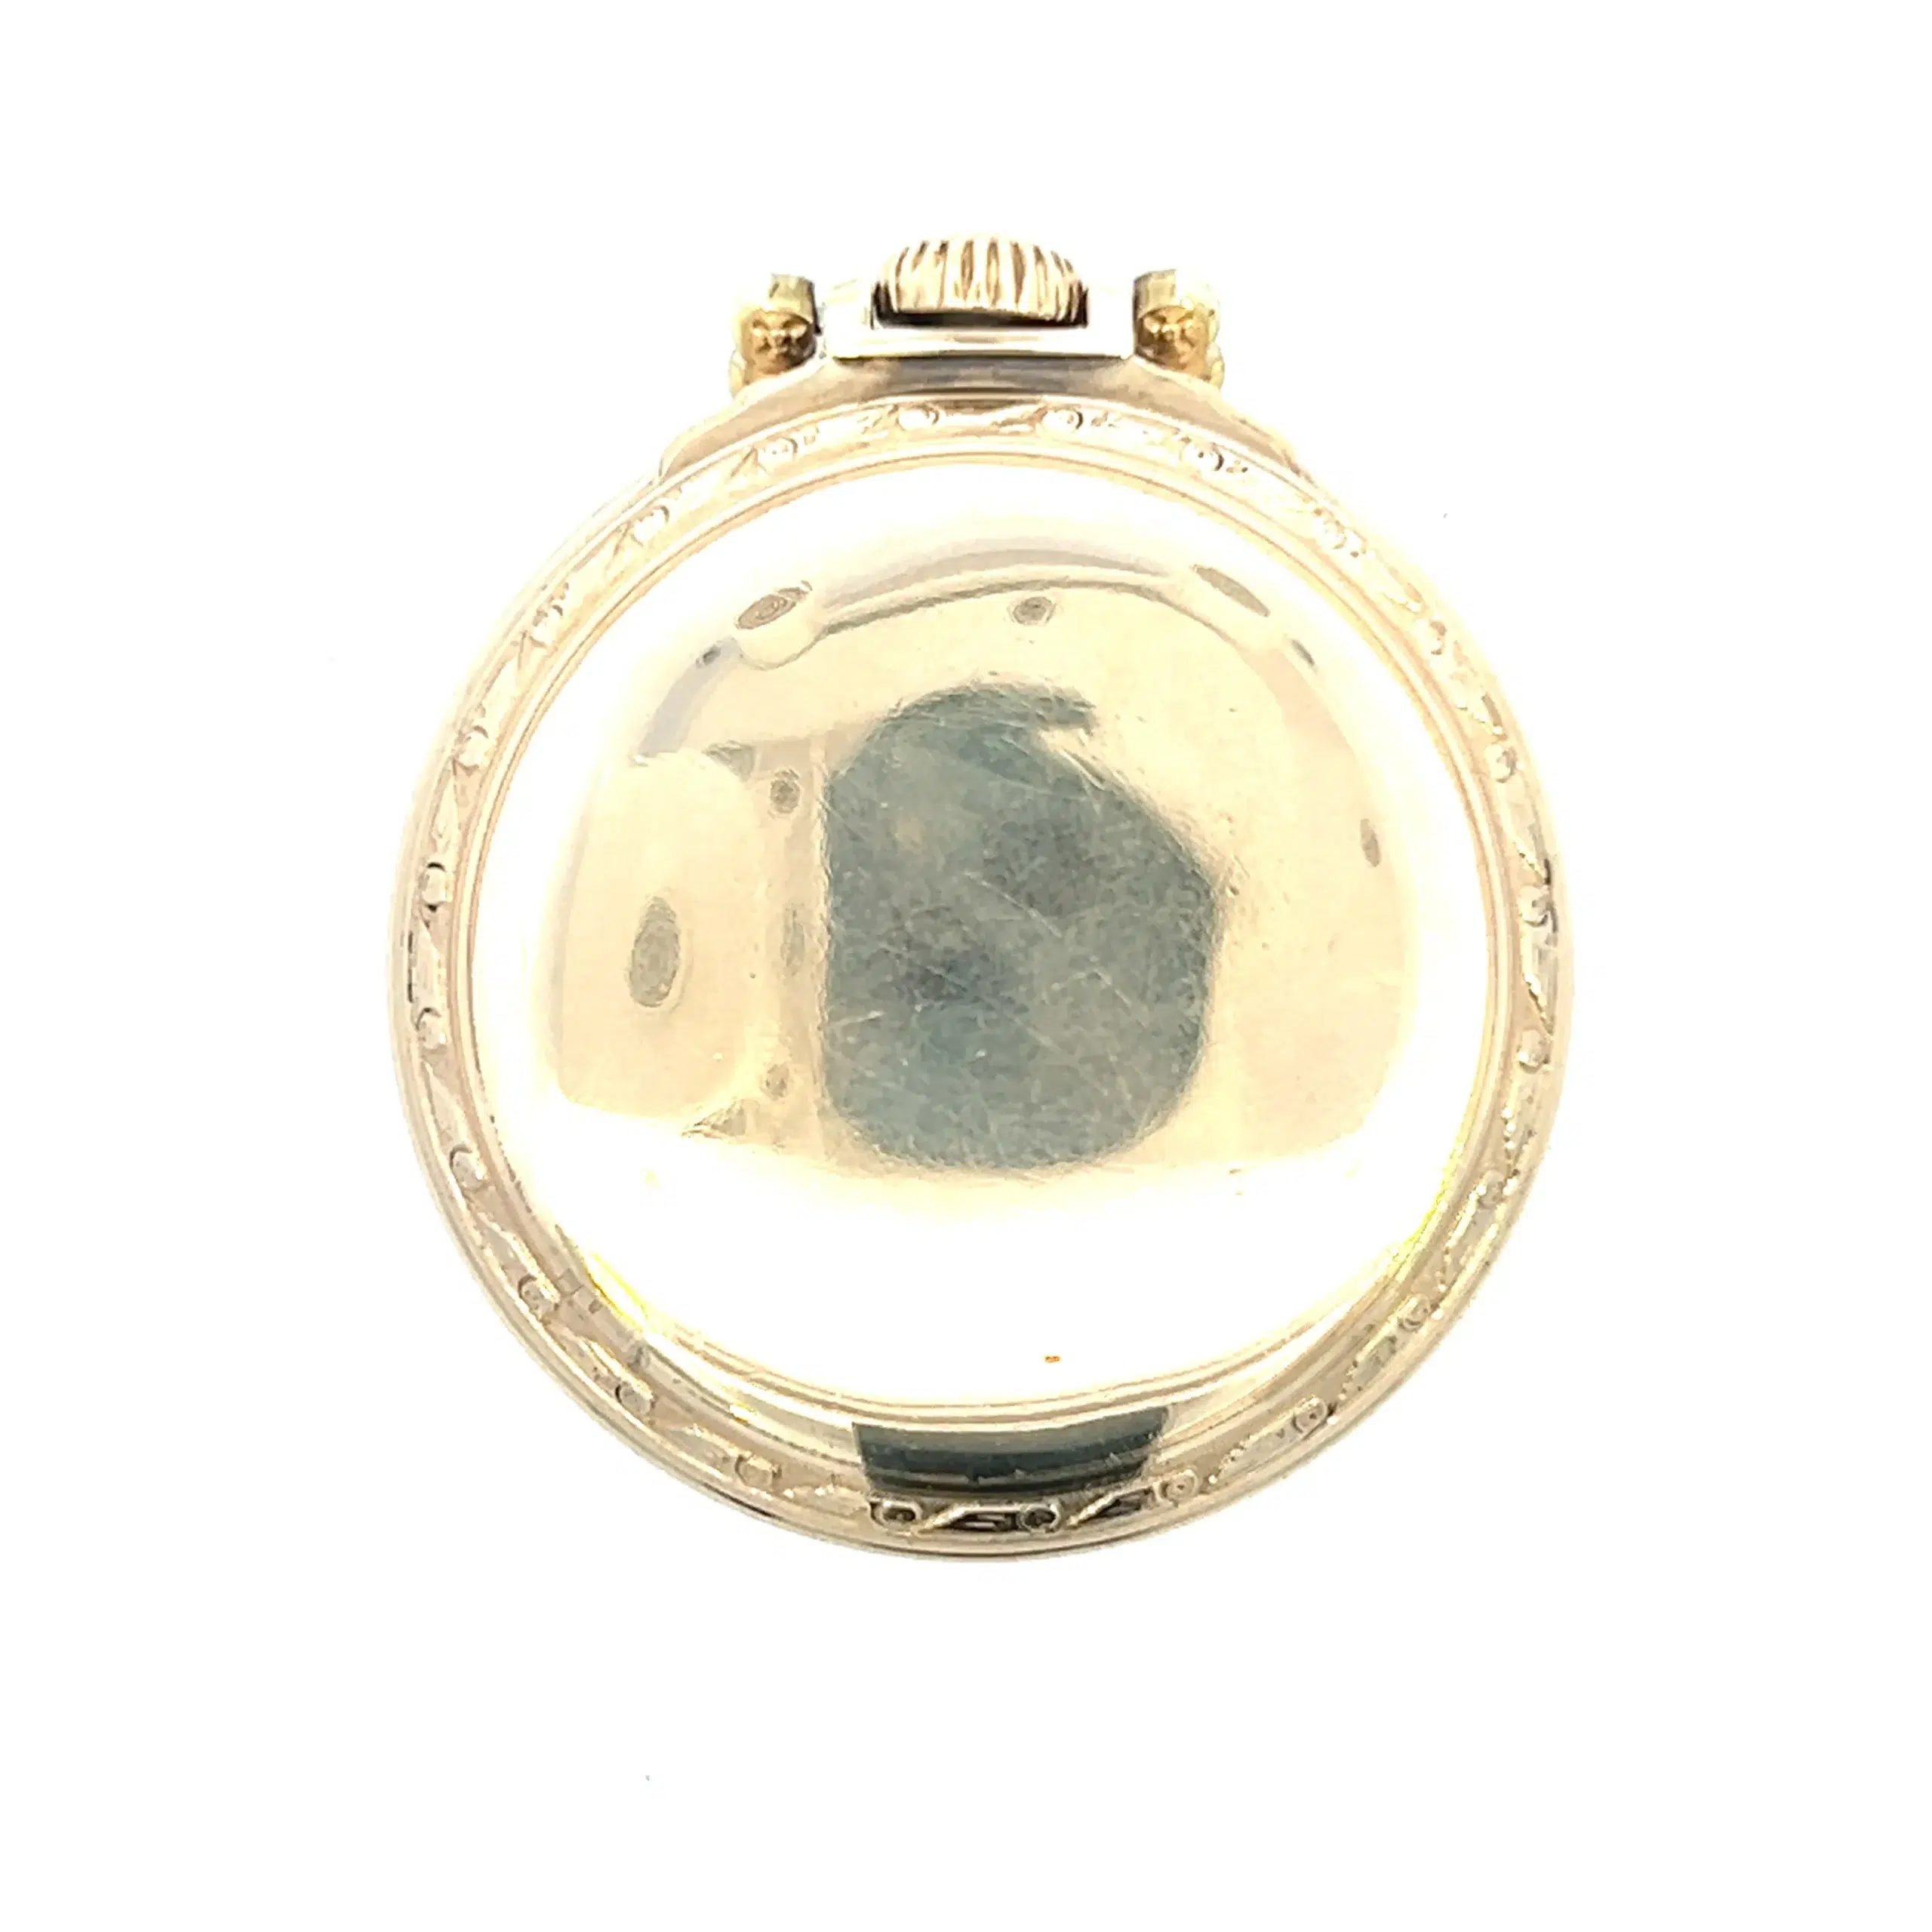 One estate vintage Hamilton Railway Pocket Watch with gold-filled case, white dial, black Arabic numerals with id number 992B.